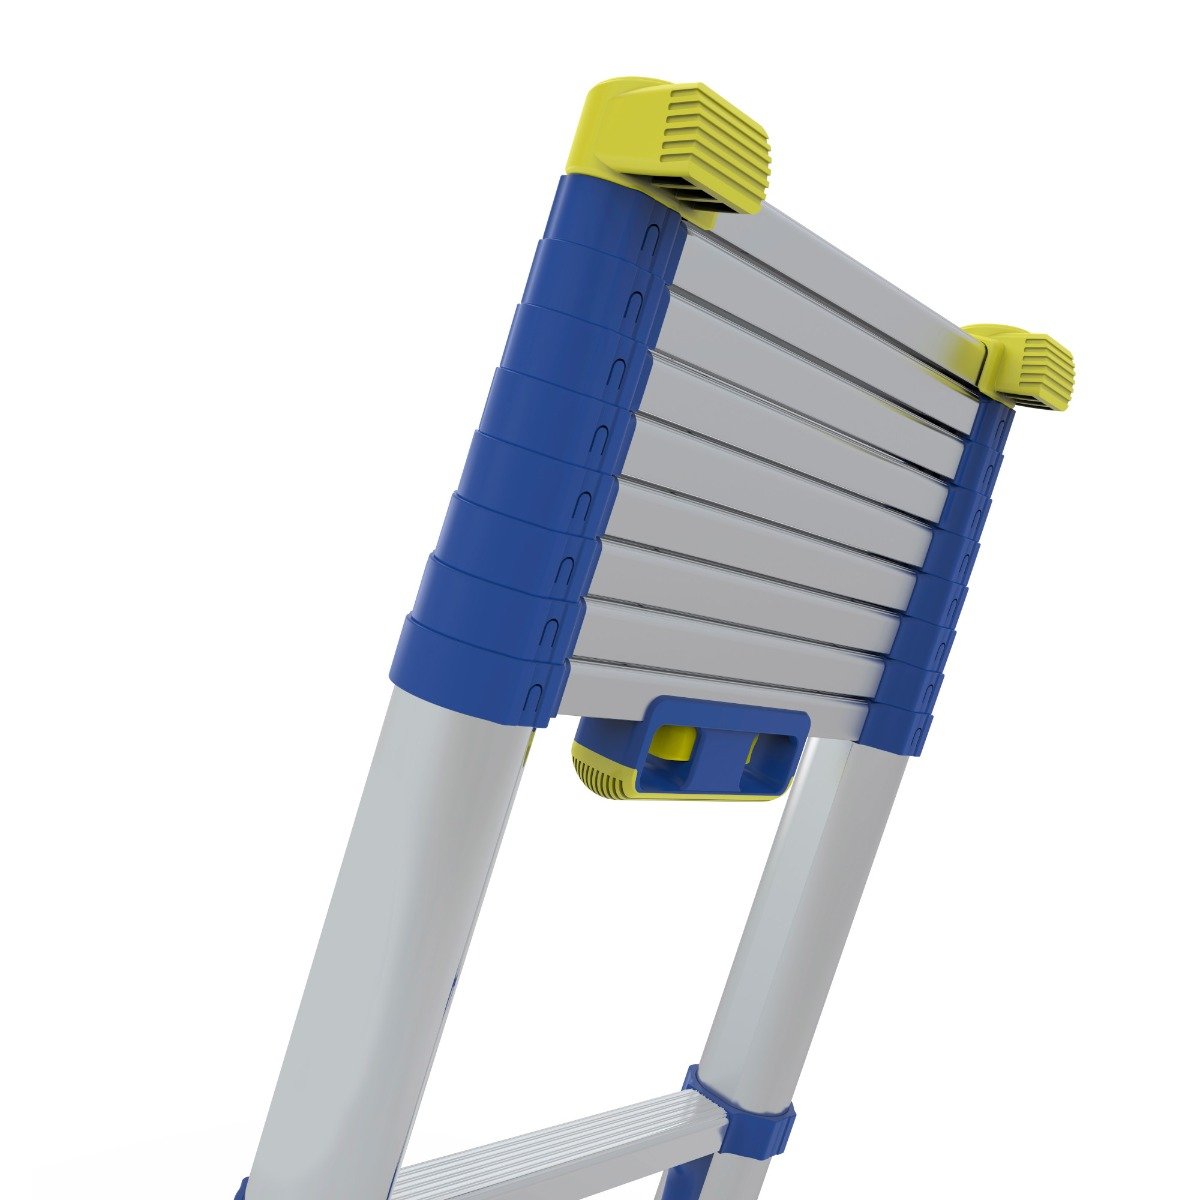 Werner Soft Close Telescopic Ladder - Wall Bumpers